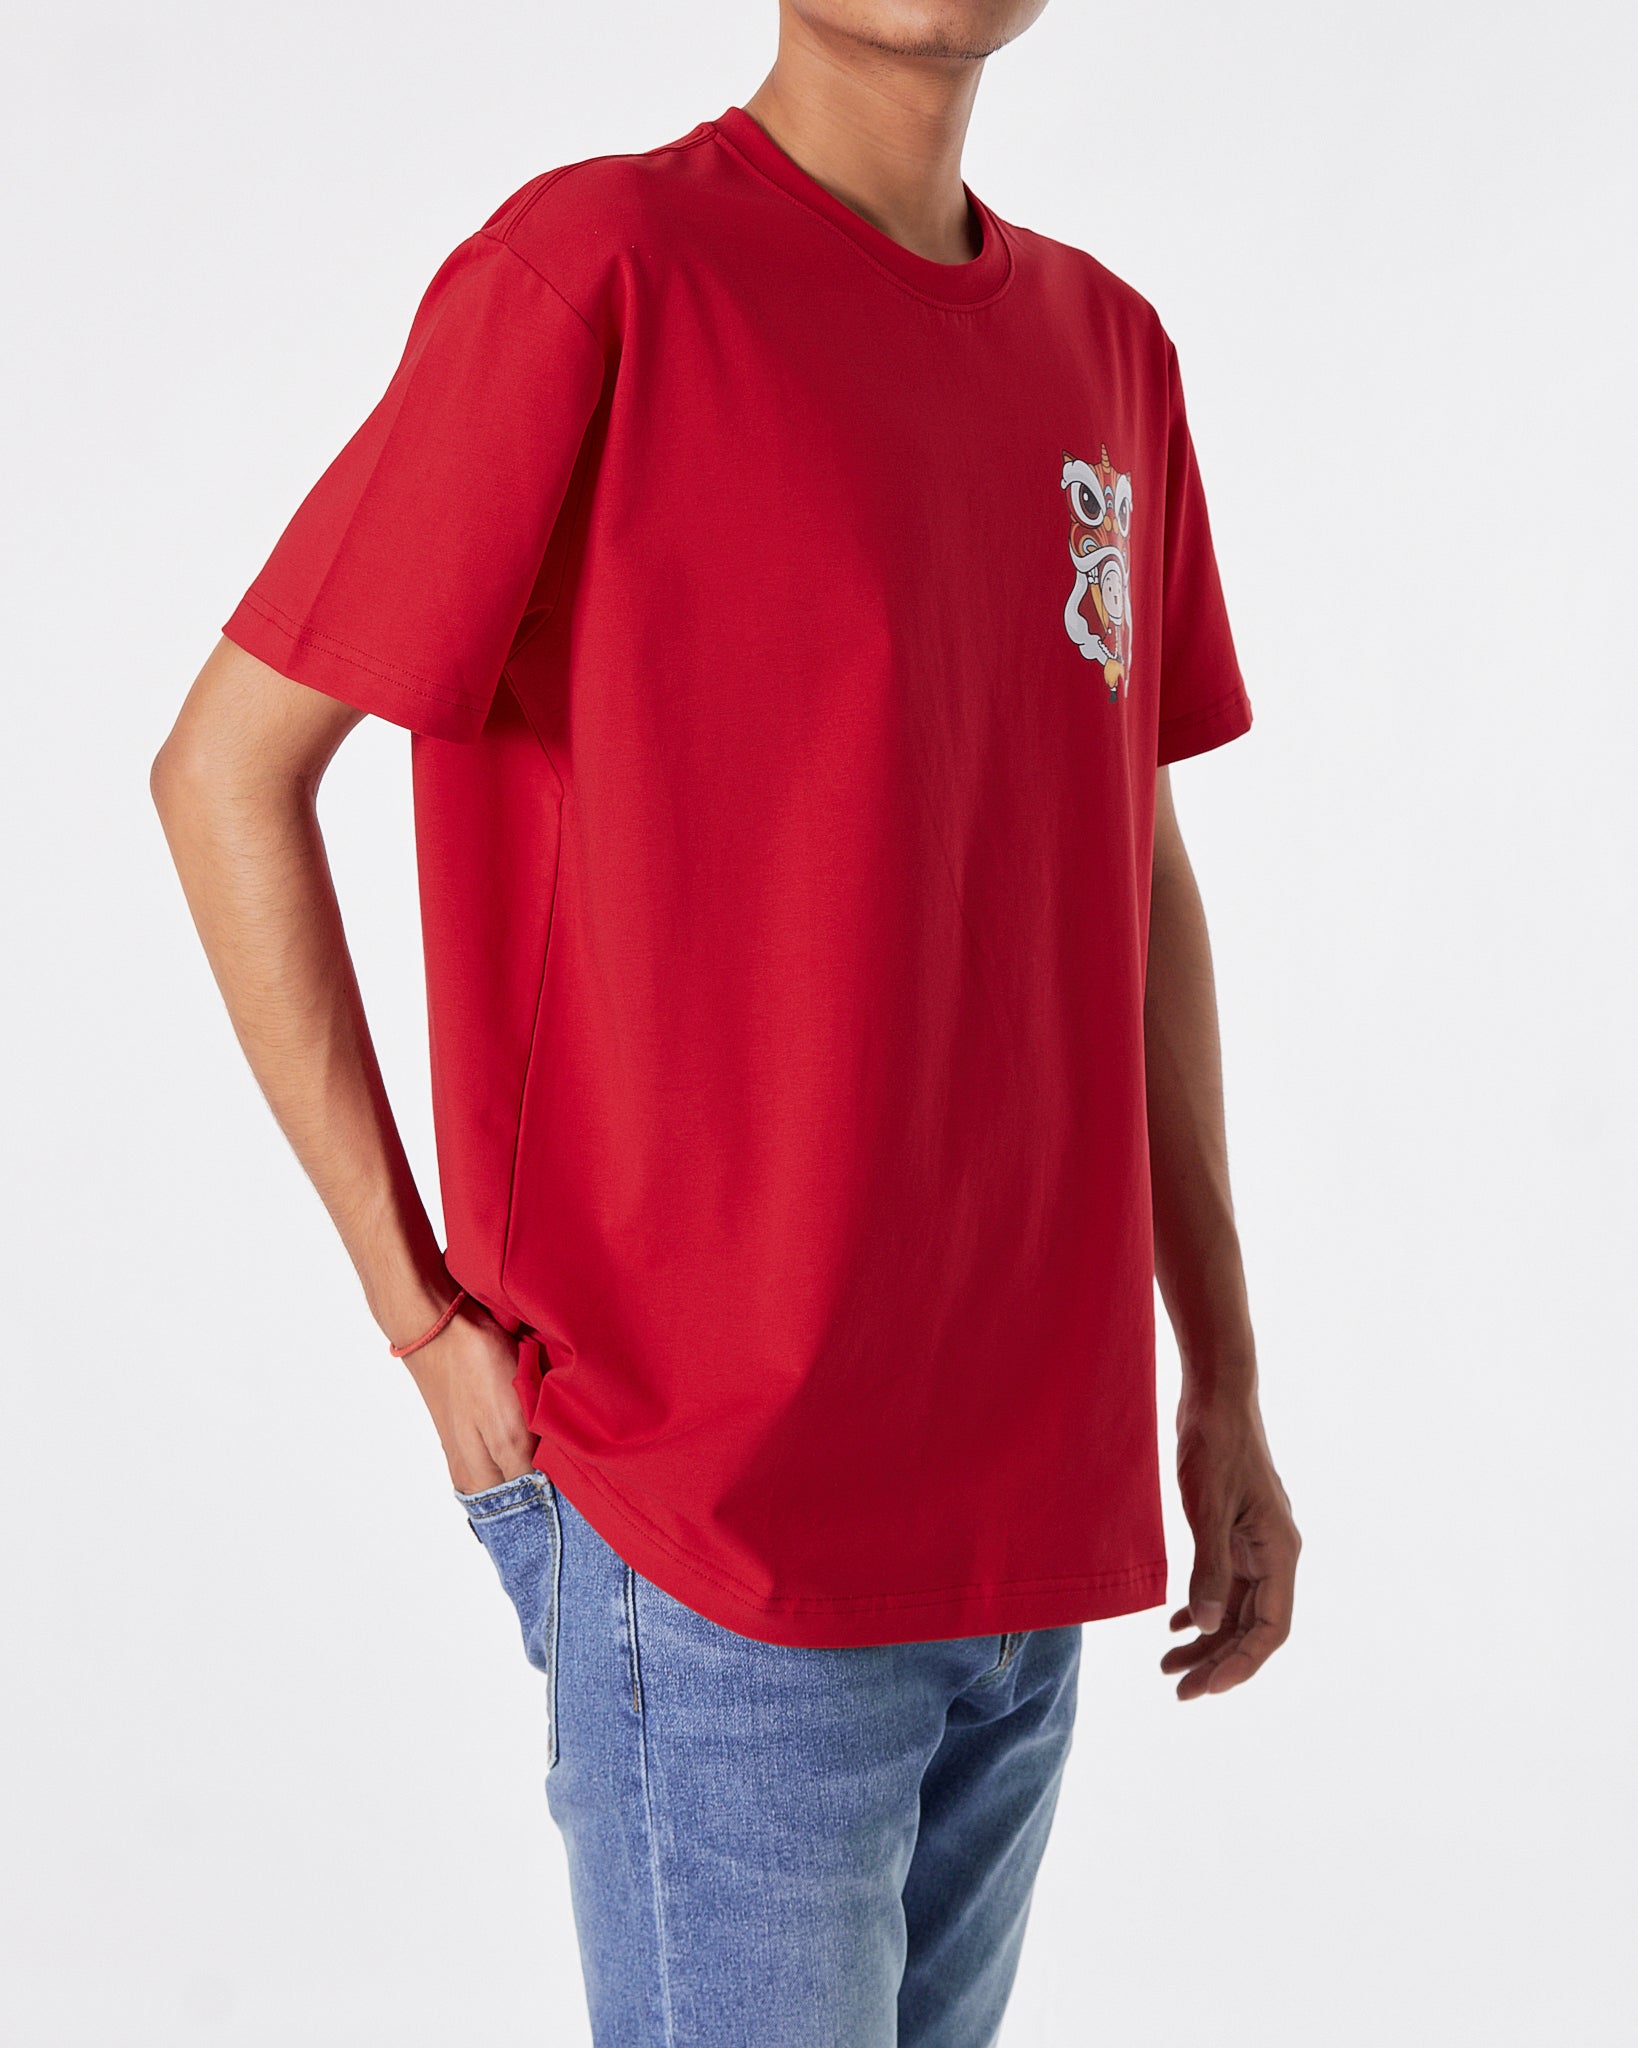 MOI Year Of The Dragon Unisex Red T-Shirt 14.90